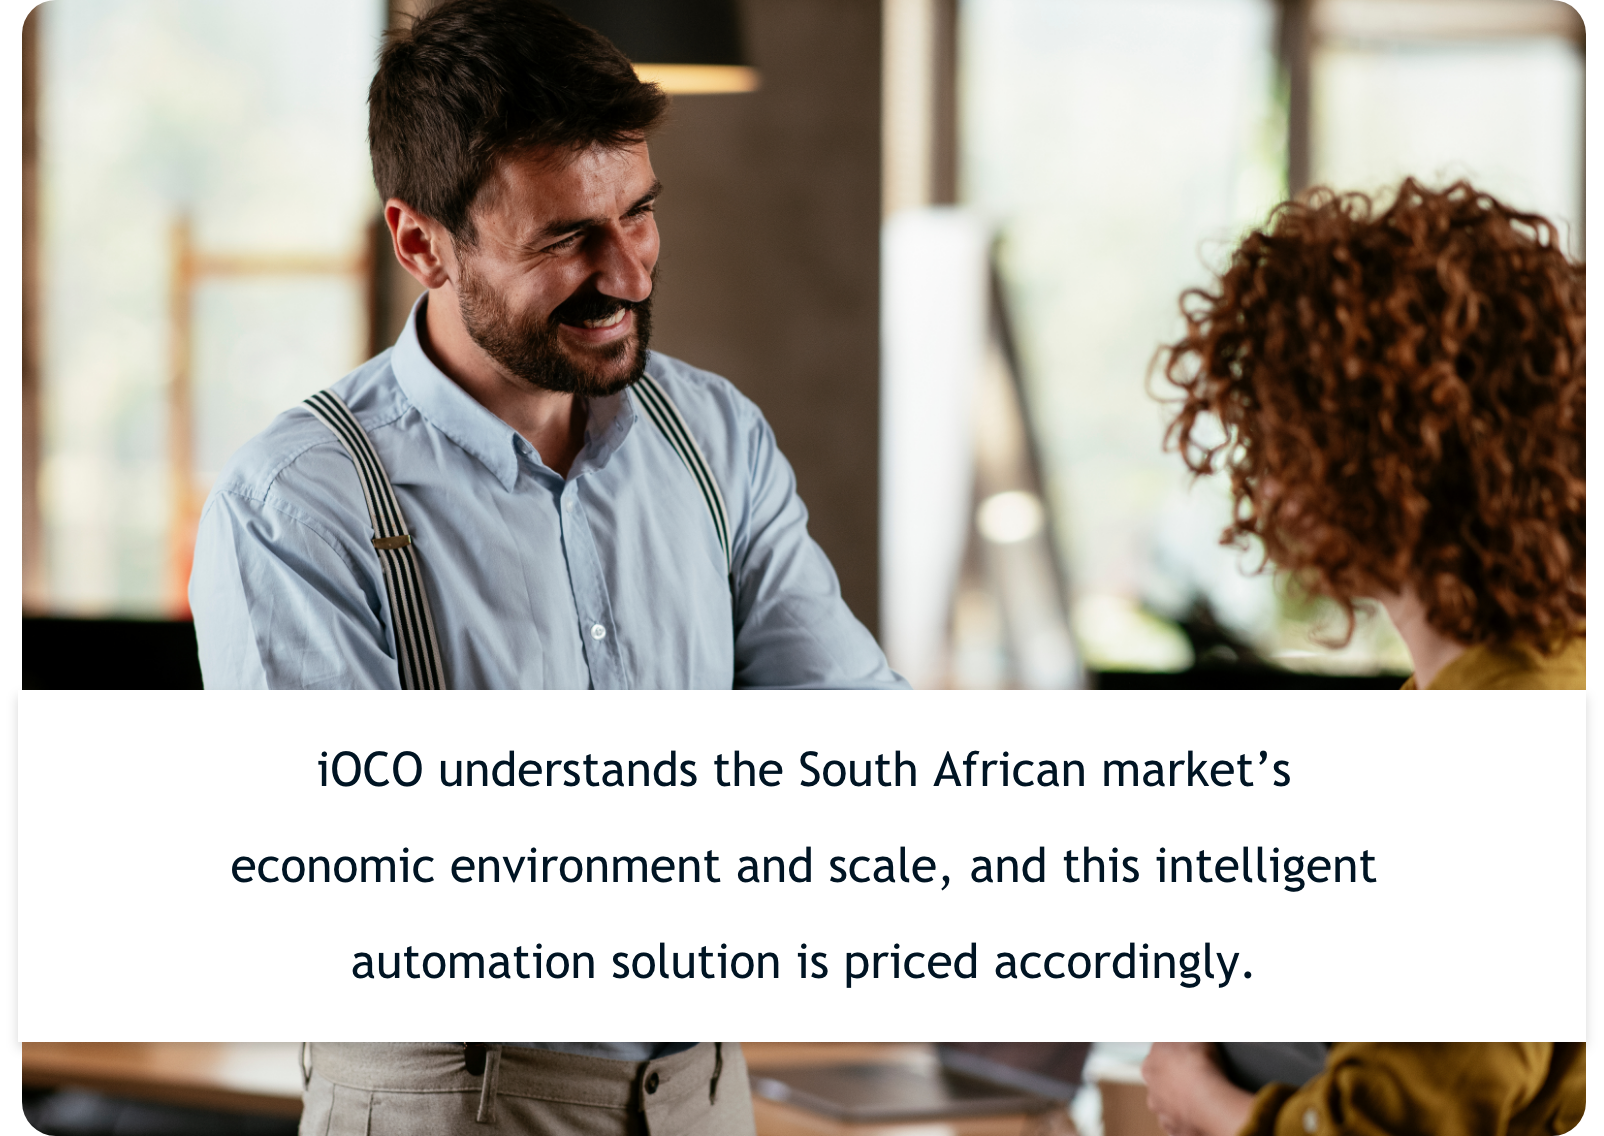 iOCO understands the South African market’s economic environment and scale, and this intelligent automation solution is priced accordingly.